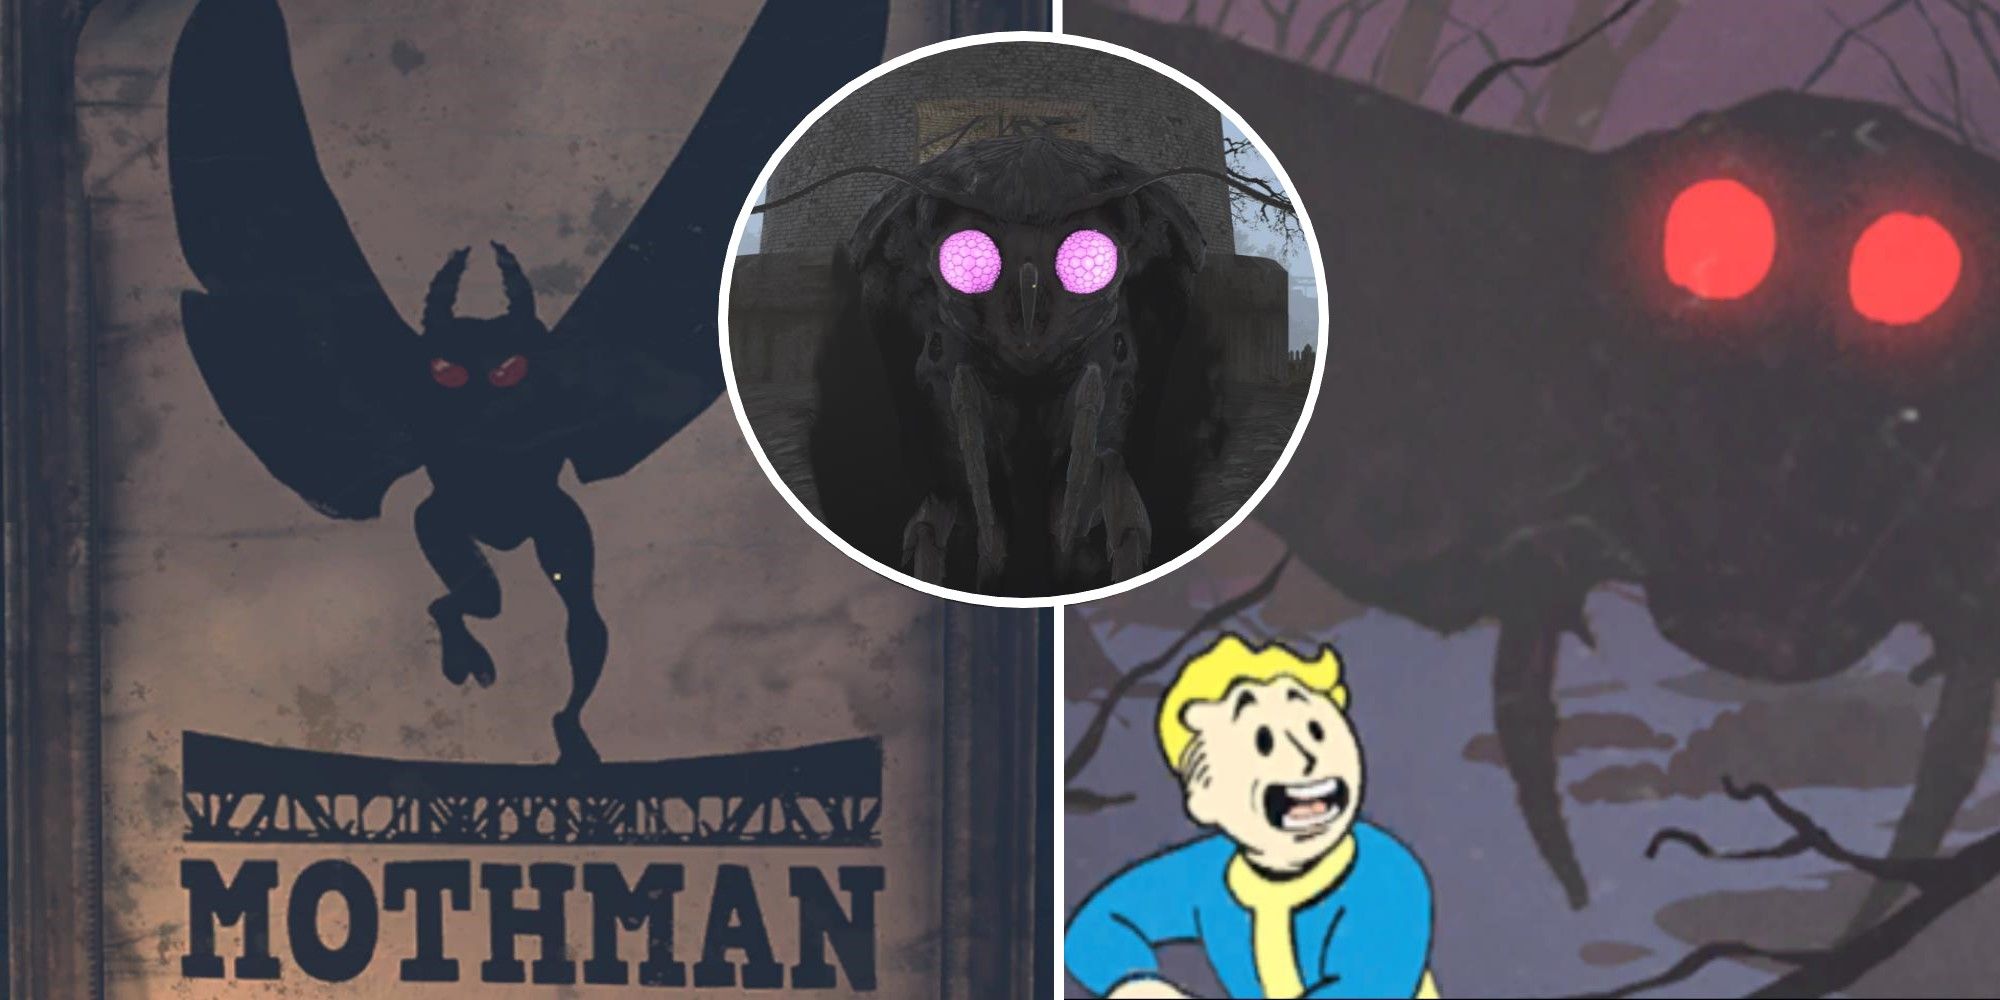 Fallout 76 Split Image Mothman Posters and Wise Mothman